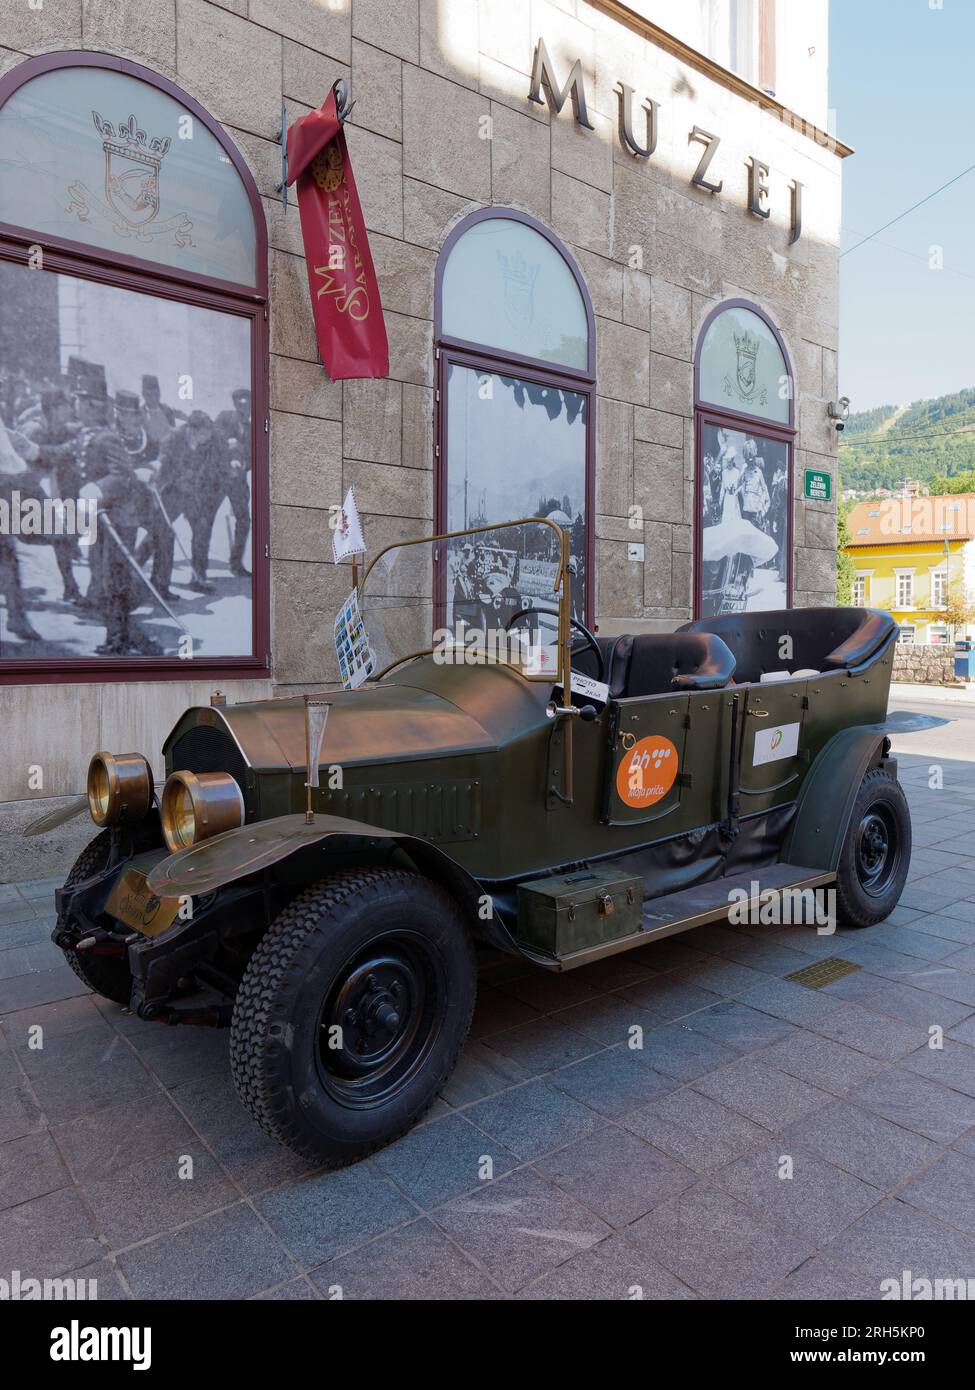 Replica Gräf & Stift open topped touring car at the site of the 1914 Sarajevo assassination. Sarajevo, Bosnia and Herzegovina, August 13, 2023. Stock Photo